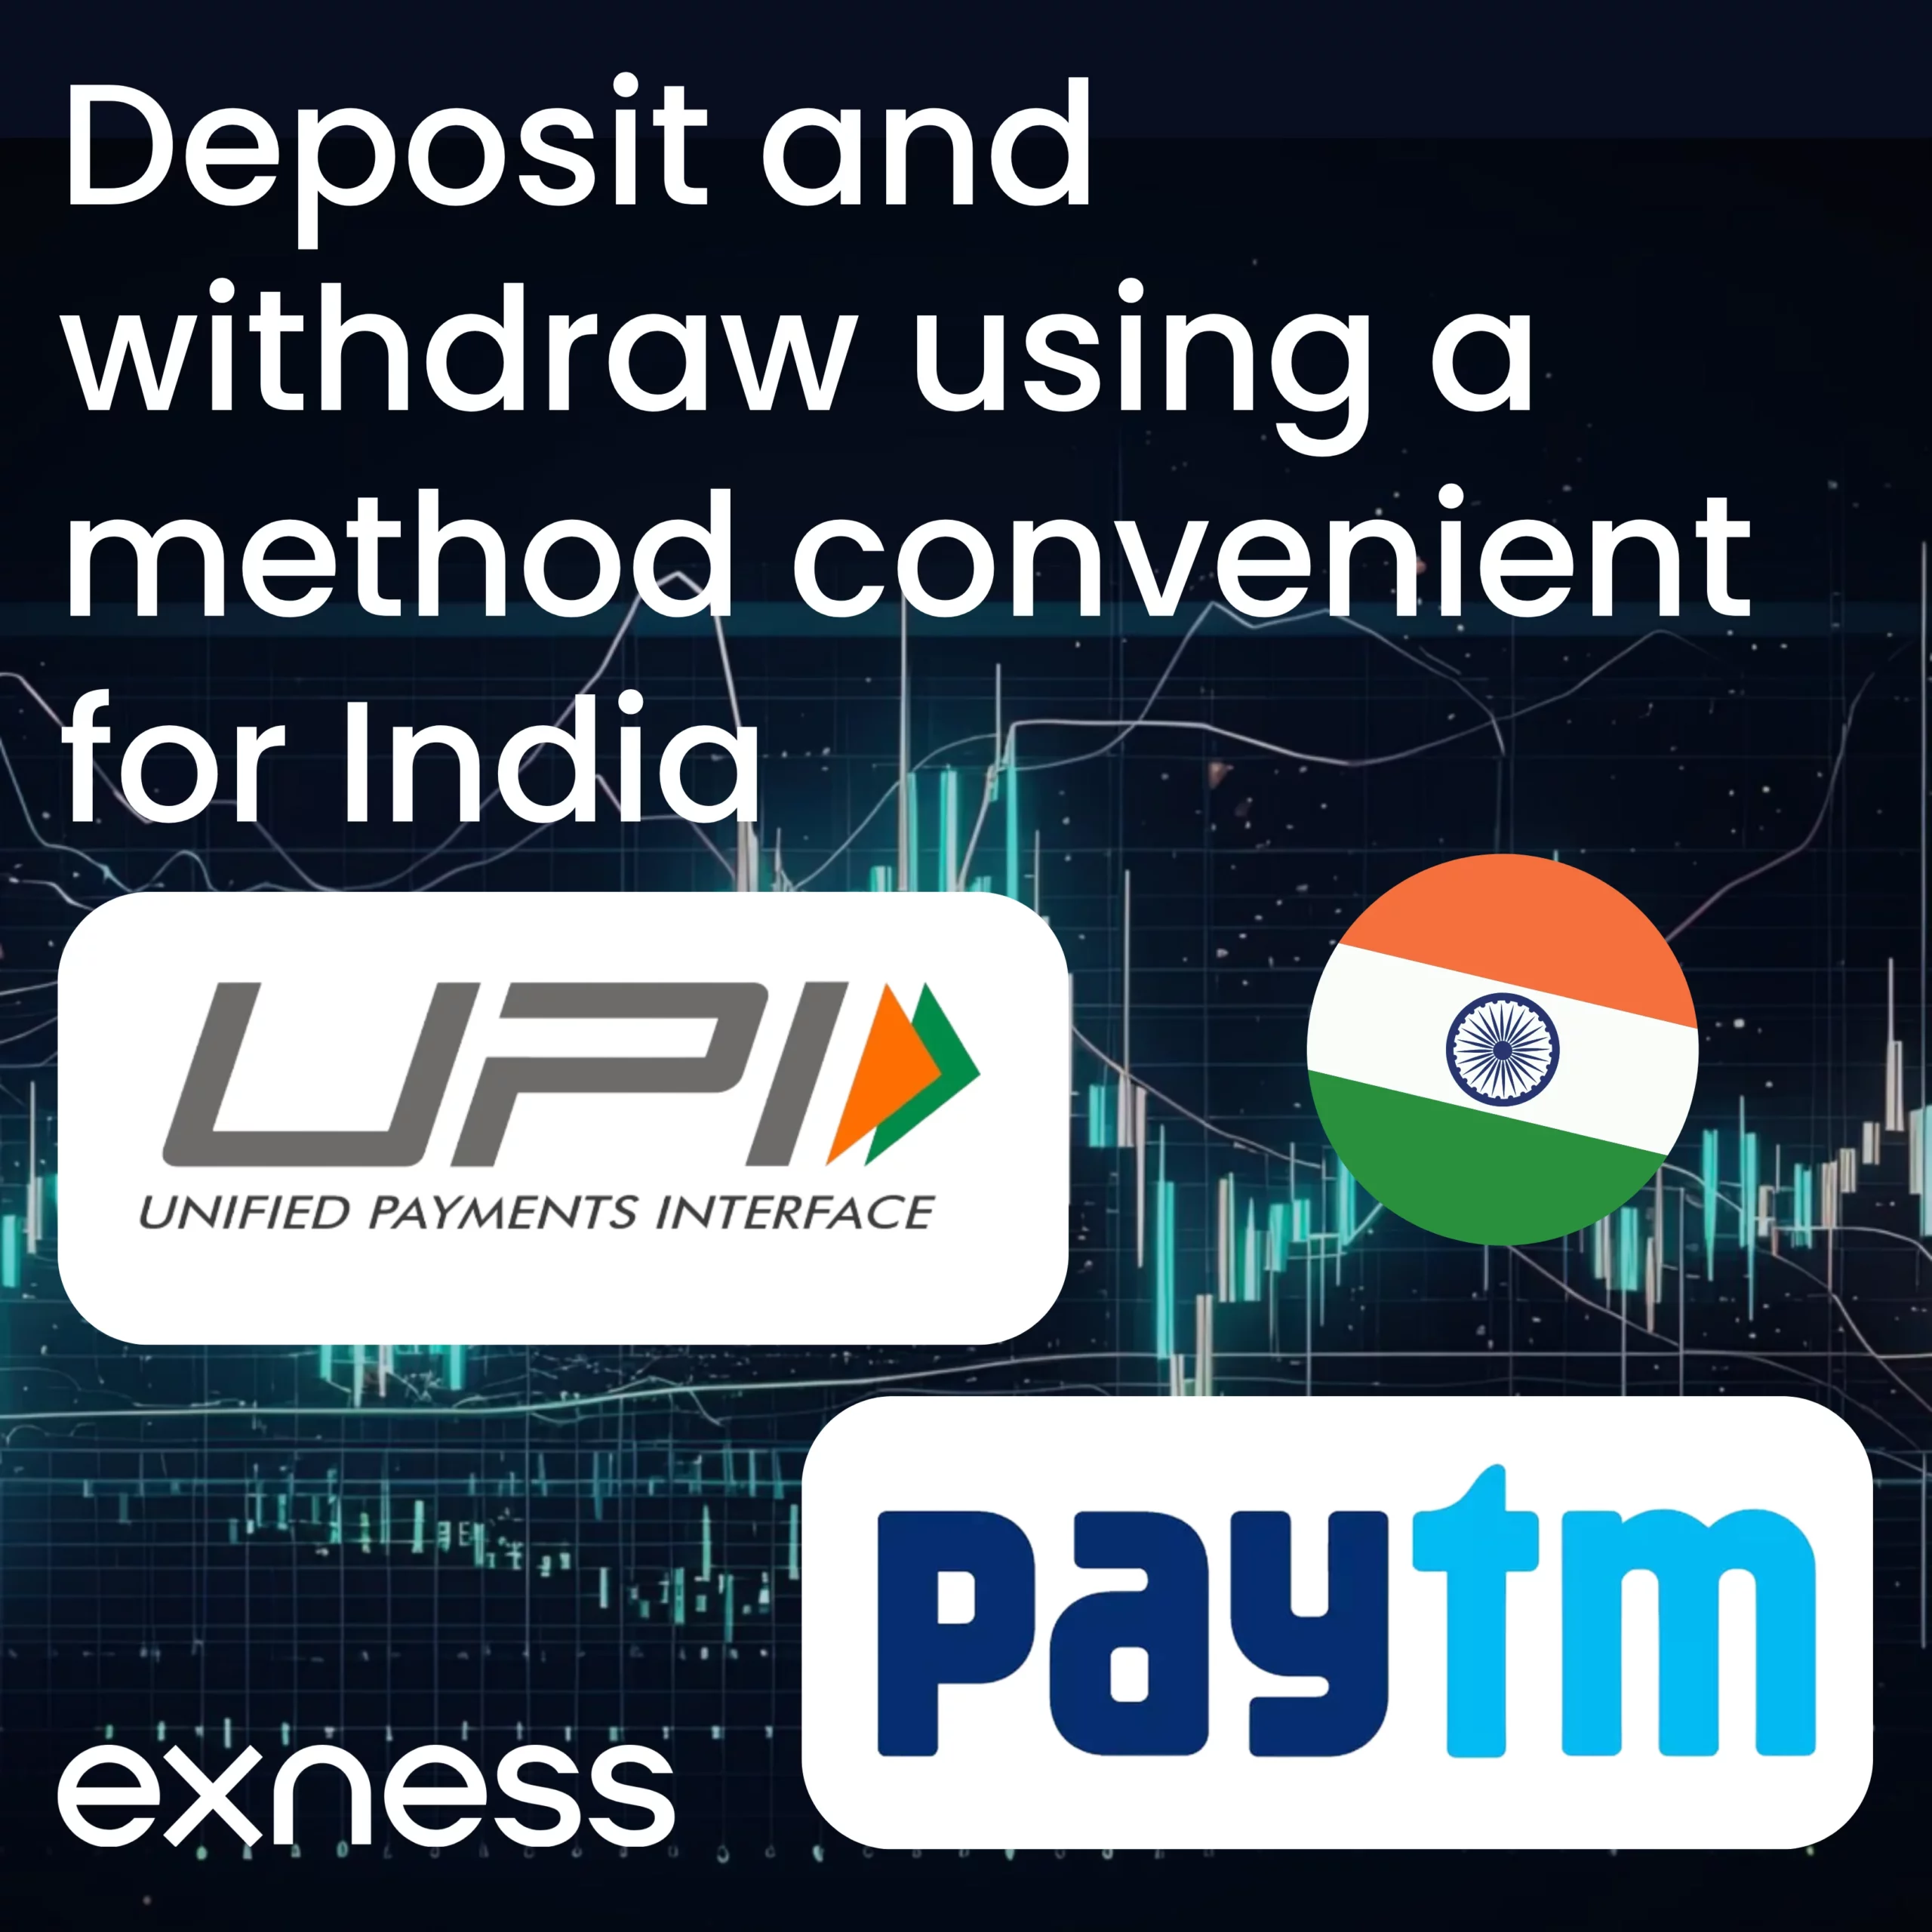 Exness Deposit and Withdrawal in India